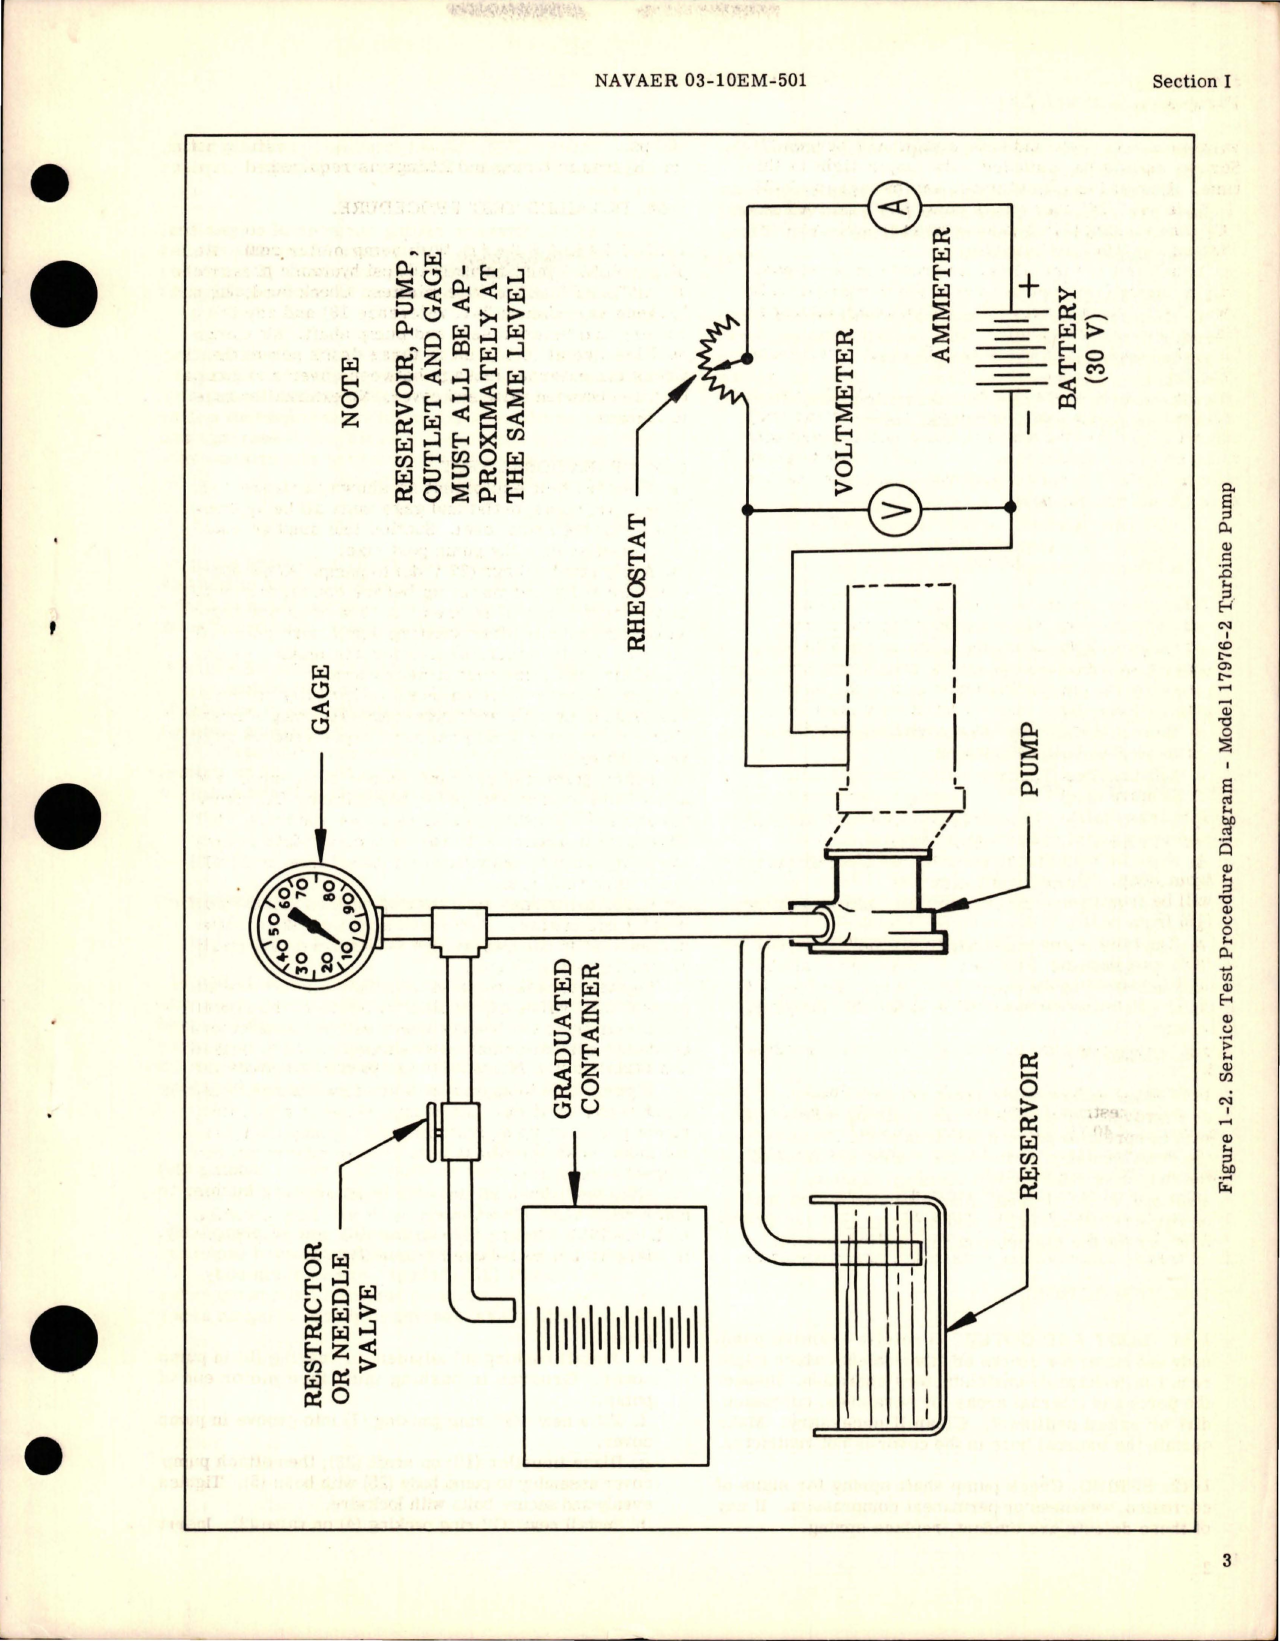 Sample page 5 from AirCorps Library document: Overhaul Instructions with Parts Catalog for Motor Driven Turbine Pump - Model 17976-2